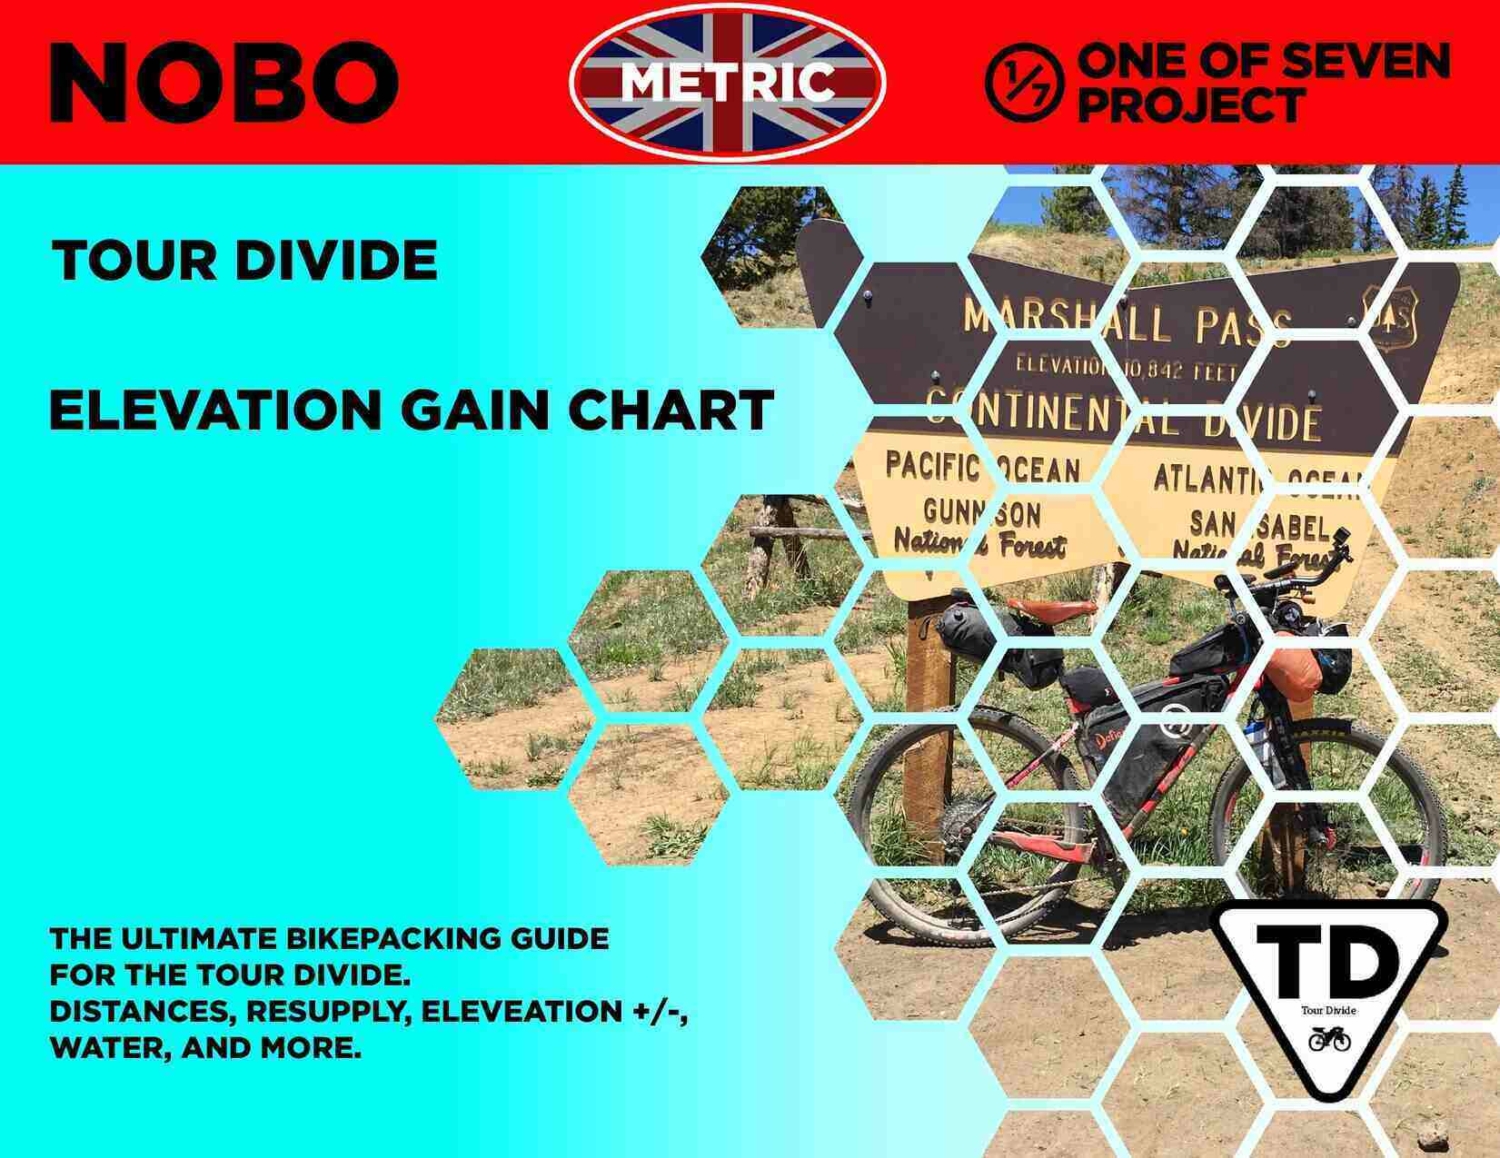 Tour Divide Metric NOBO Elevation Gain Chart Cover bikepacking guides planning aids